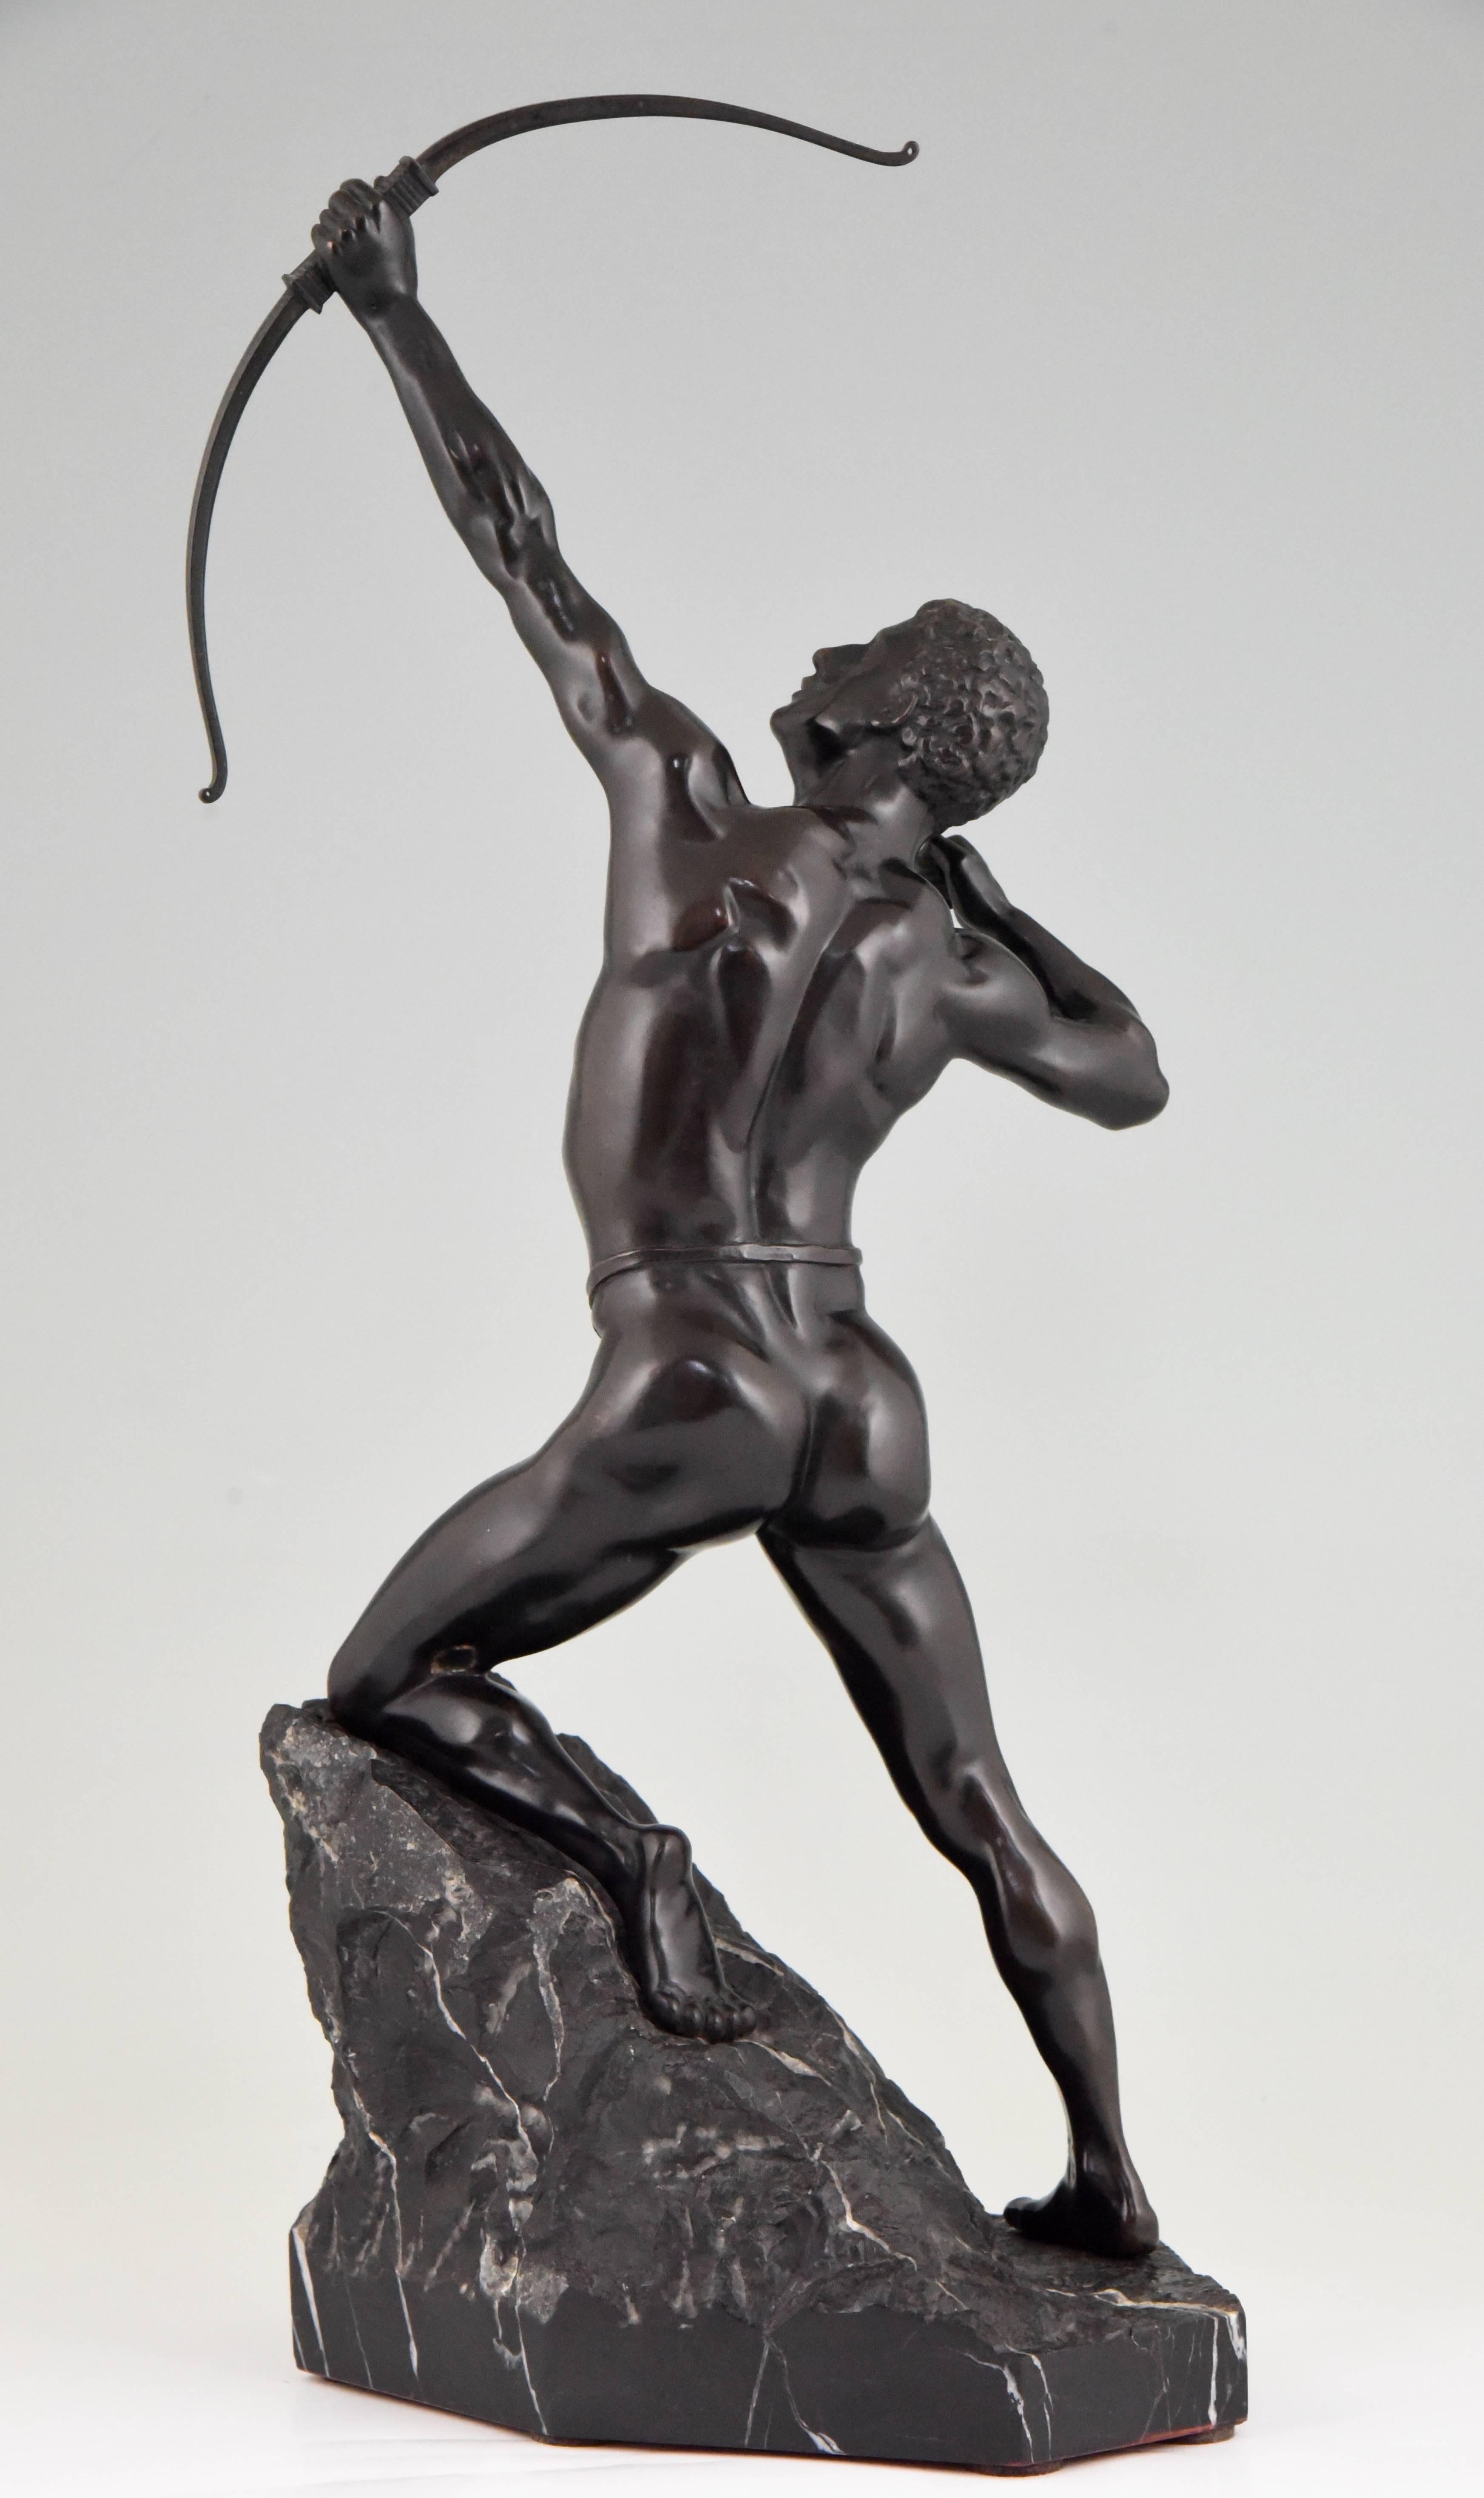 Antique bonze sculpture male nude Archer.
Germany, circa 1900

Material: Bronze, black patina. ?On marble base.
Origin: Germany.
Size: H. 53 cm. x L. 23 cm. x W. 15 cm. ? 
H. 20.9 inch x L. 9 inch x W. 5.9 inch.
Condition: Very good condition.